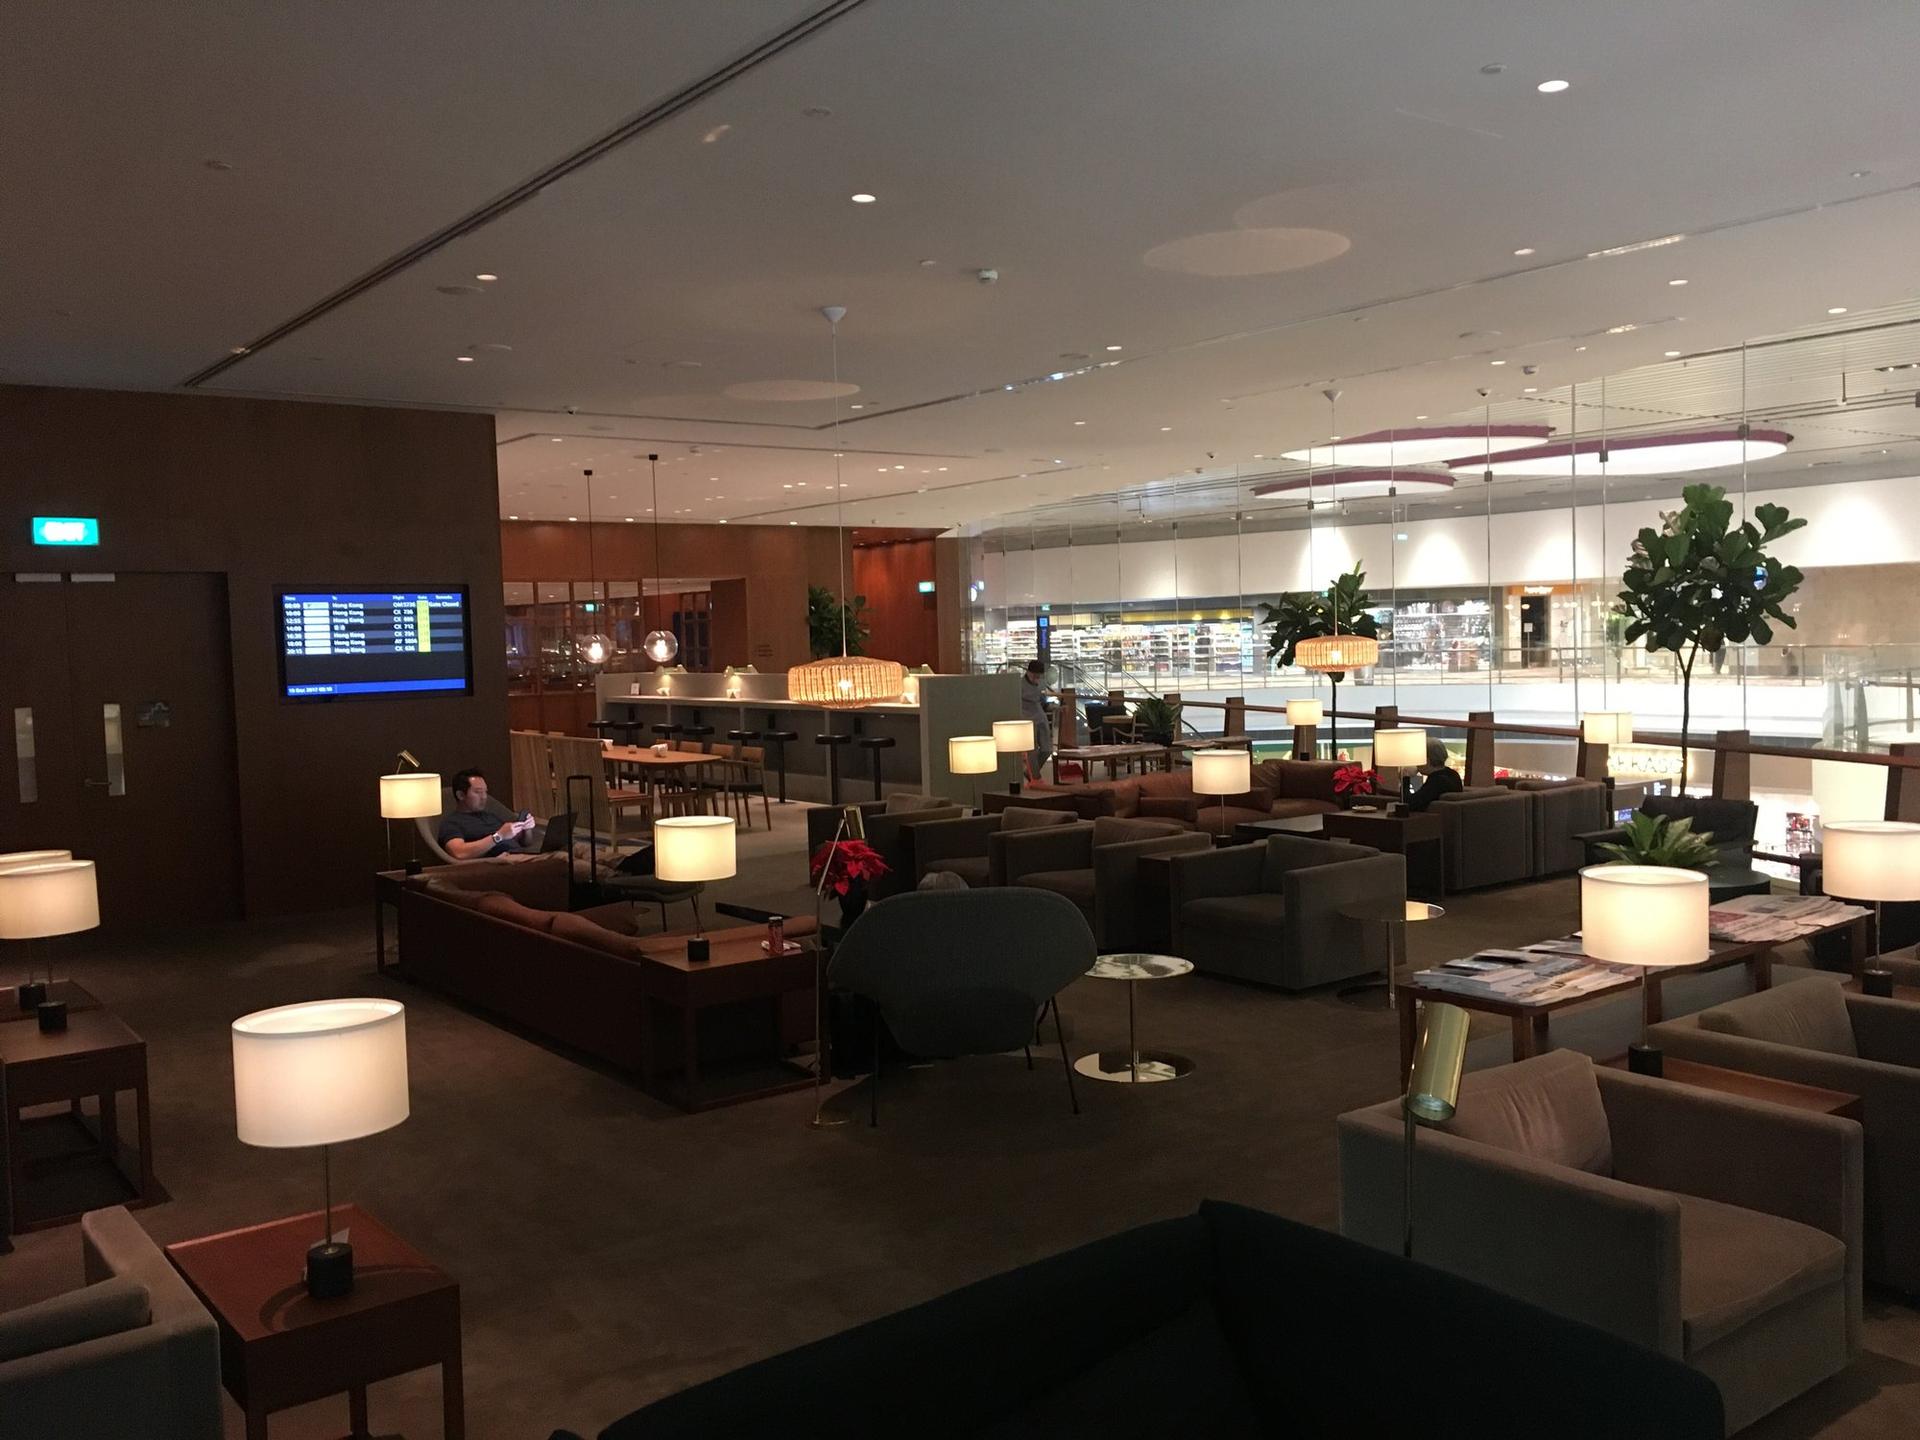 Cathay Pacific Lounge image 12 of 60